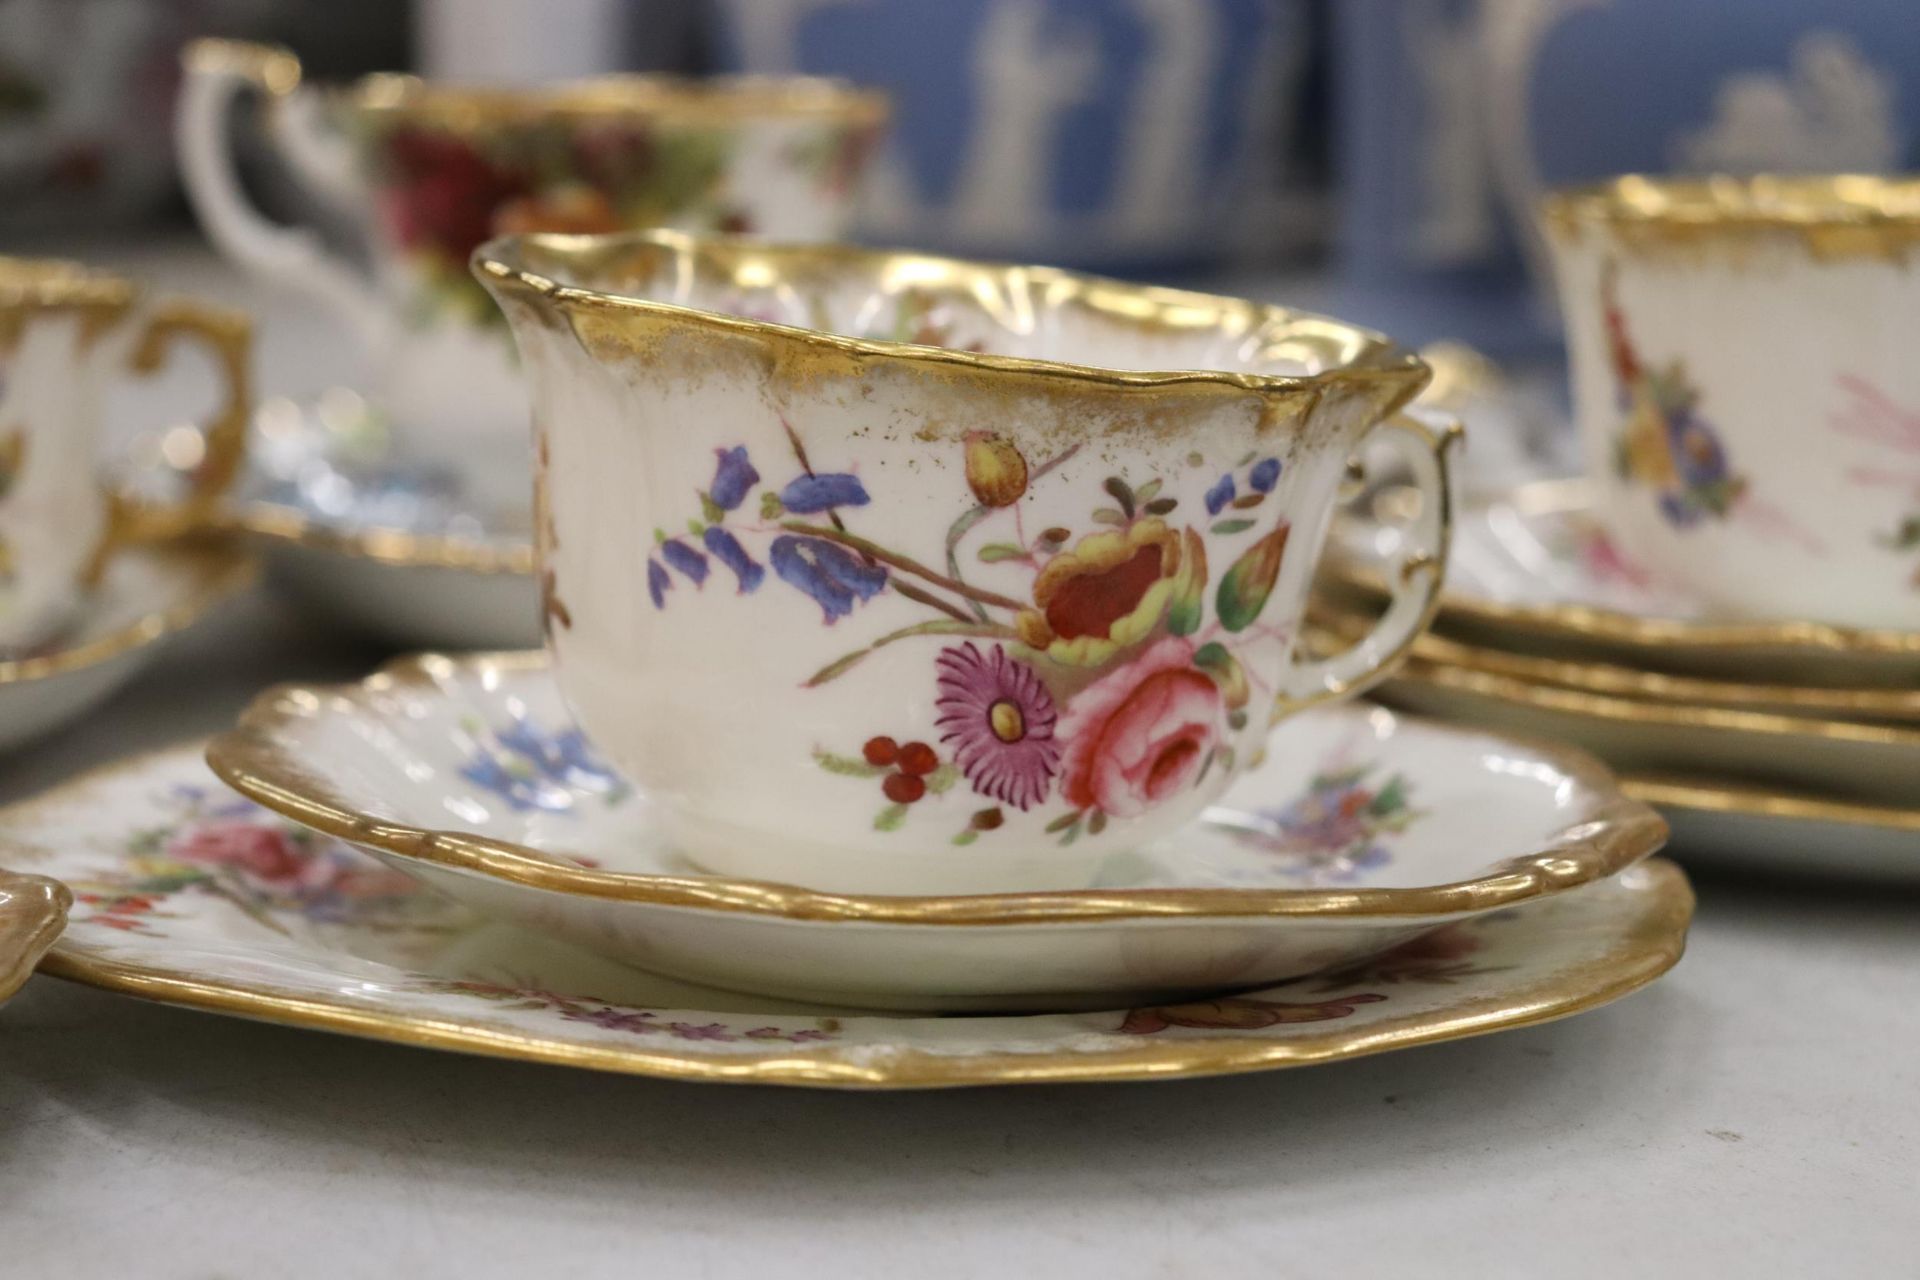 A 15 PIECE PART TEASET HAMMERSLEY AND CO TOGETHER WITH AN OLD ROYAL ALBERT COUNTRY ROSES CAKE PLATES - Image 3 of 10